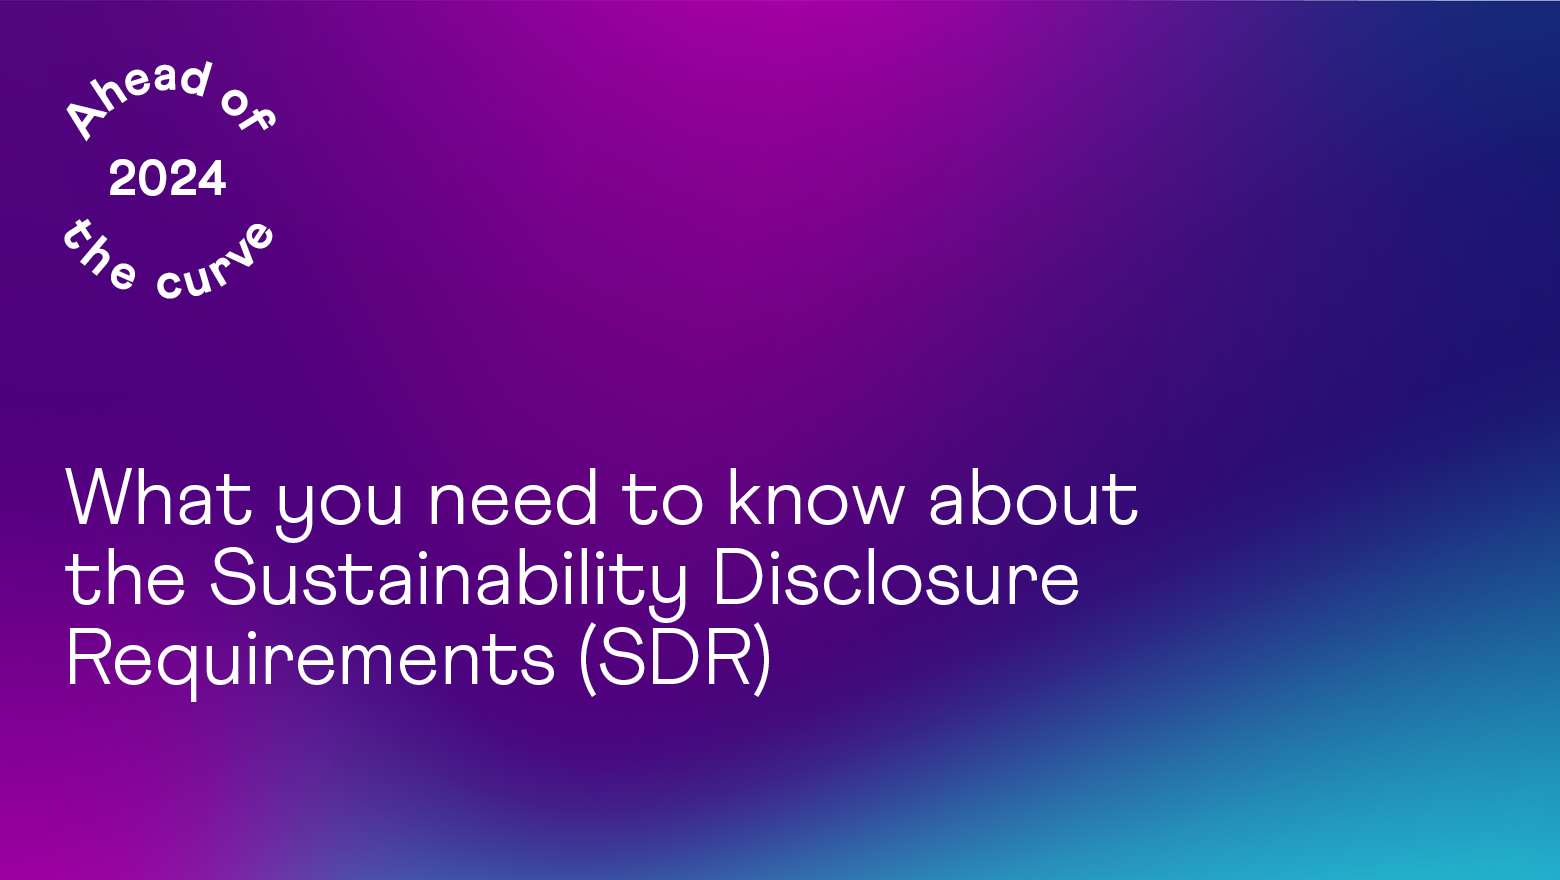 What you need to know about the Sustainability Disclosure Requirements (SDR)